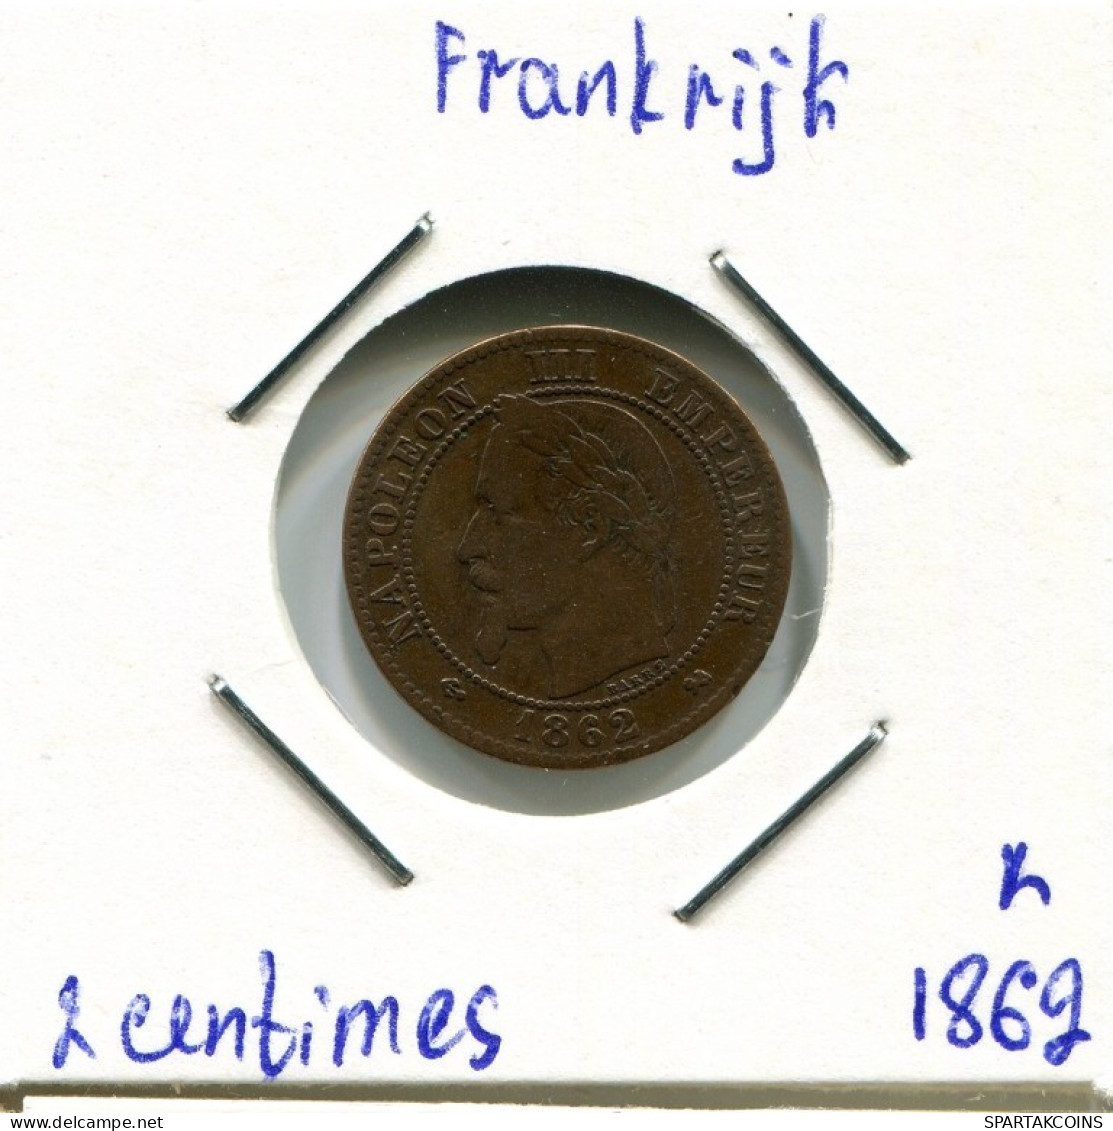 2 CENTIMES 1877 K FRANCE Coin Napoleon III Imperator #AK980.U.A - 2 Centimes